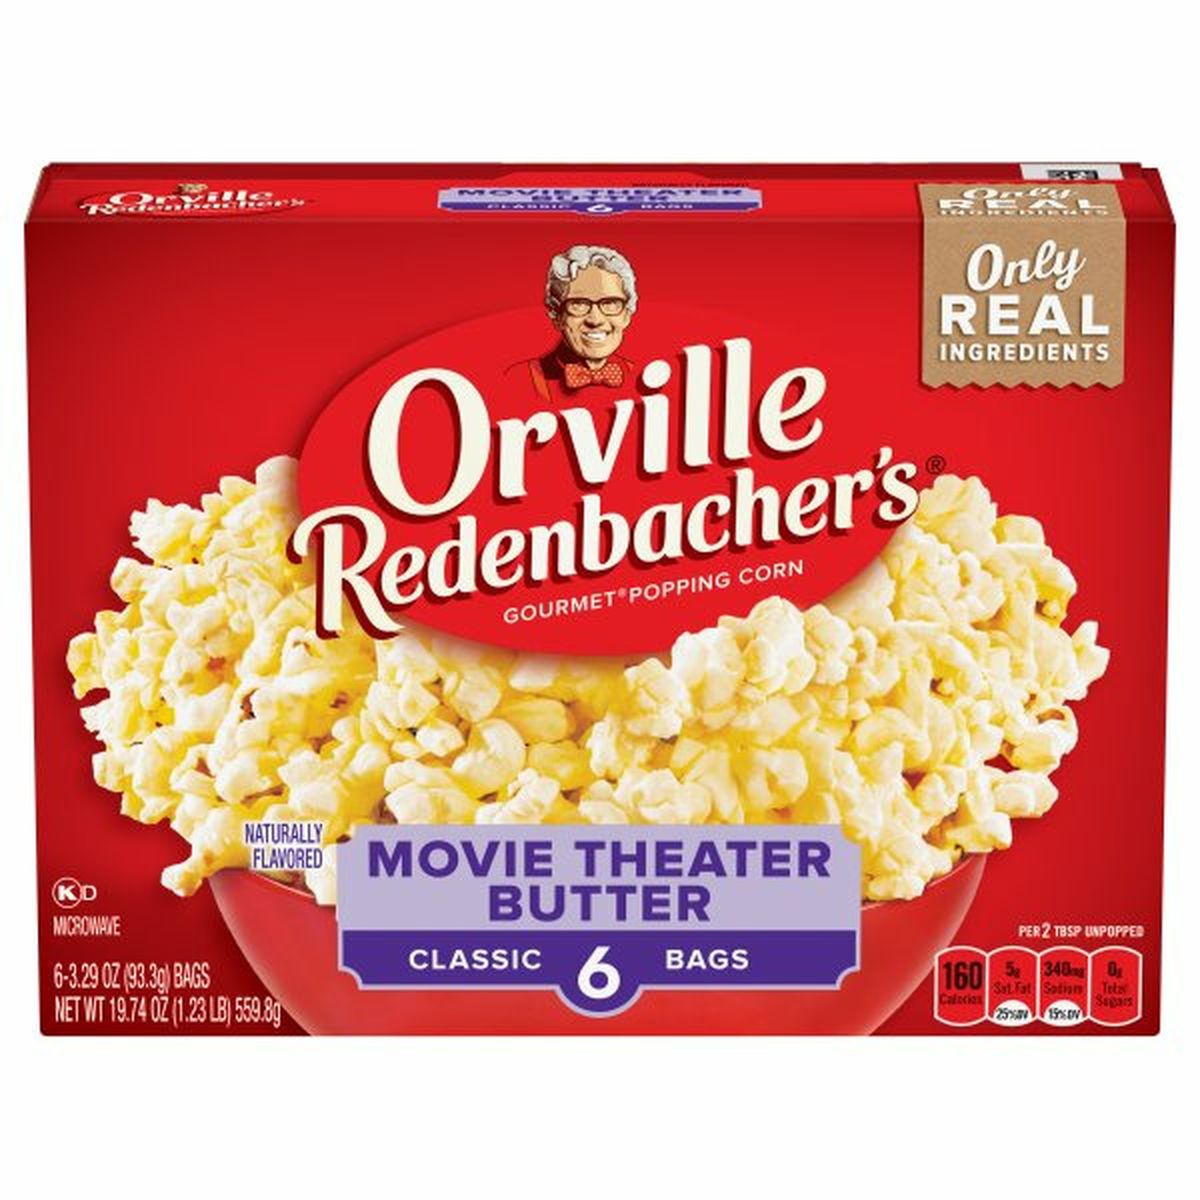 Calories in Orville Redenbacher's Popping Corn, Gourmet, Movie Theater Butter, Classic Bags, 6 Pack